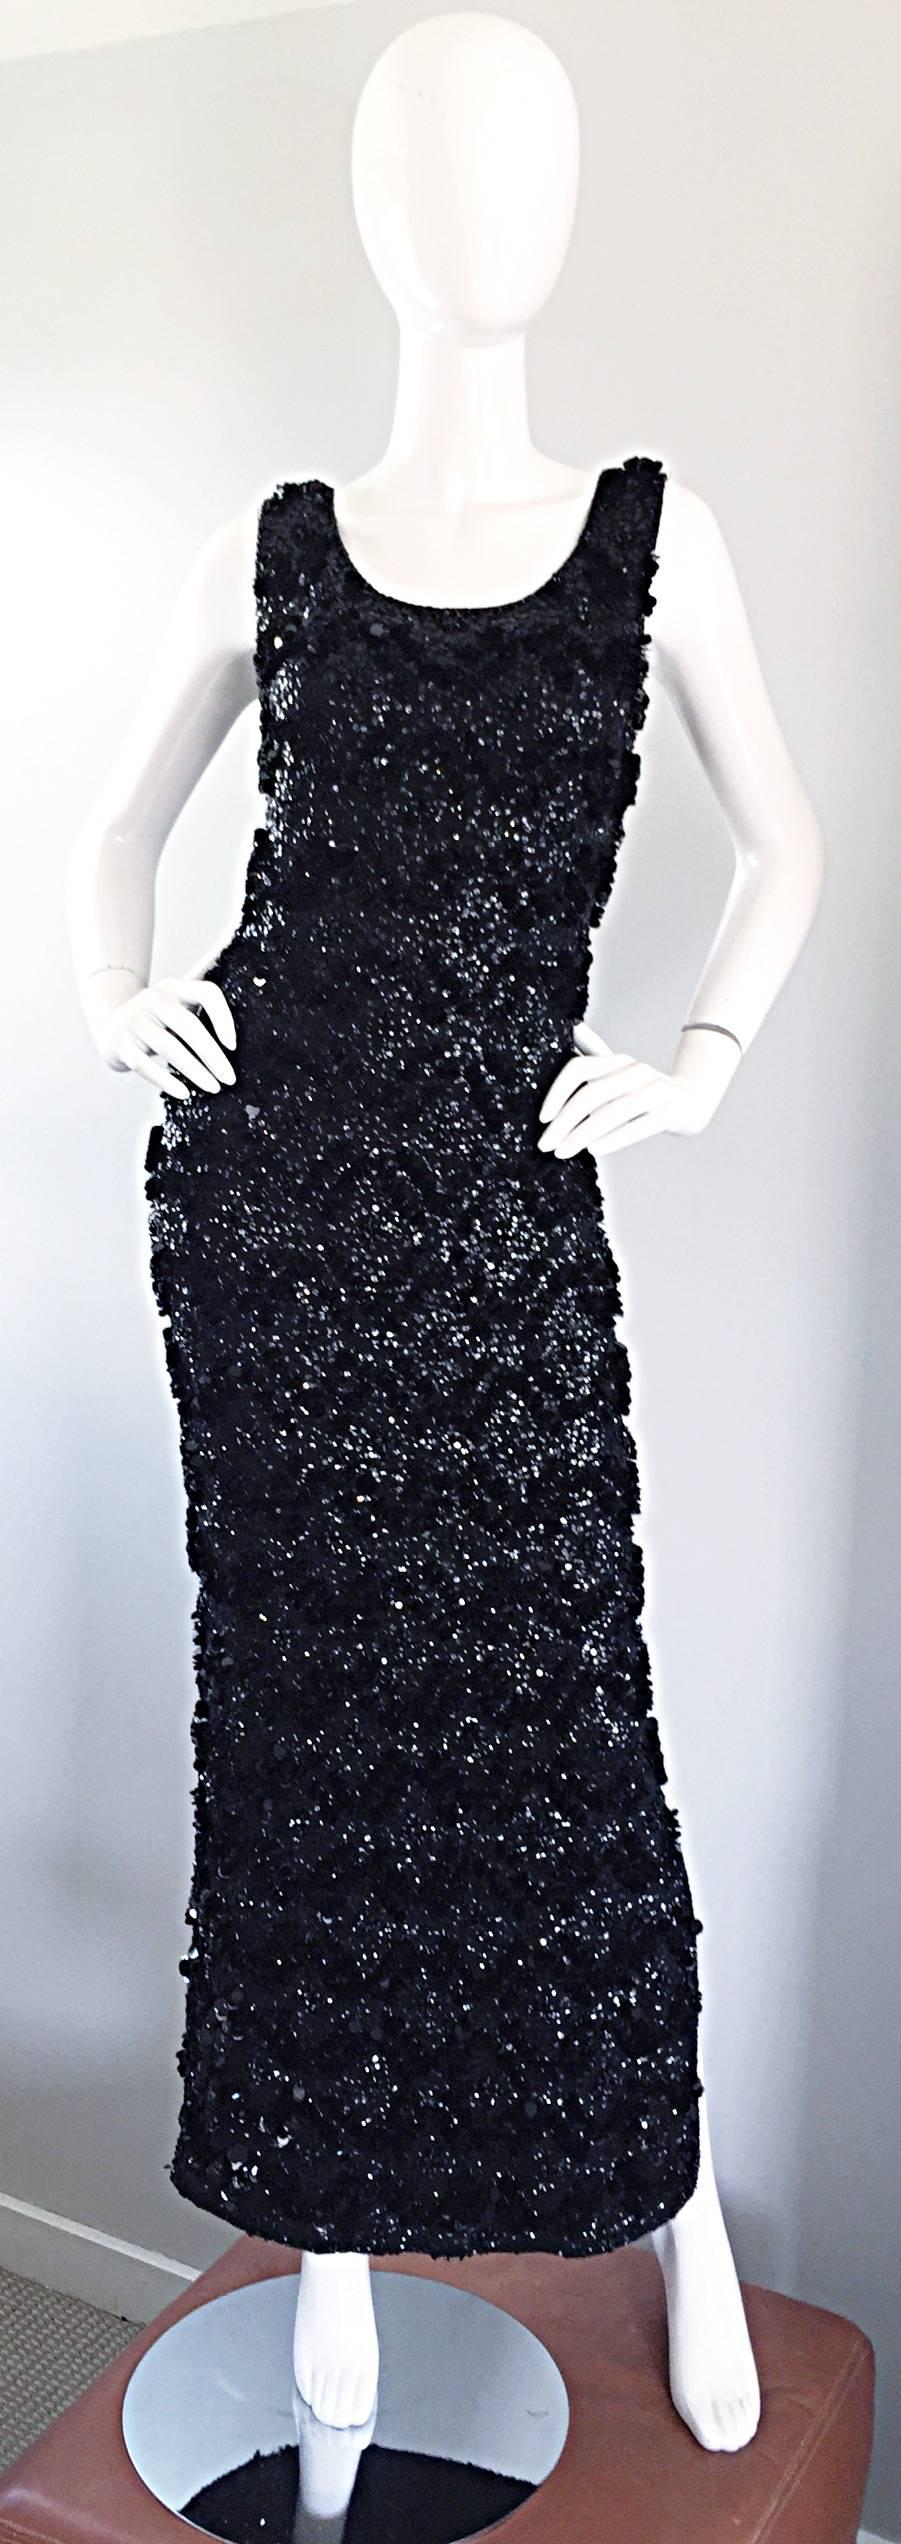 Incredible 1950s Vintage Black Sequin Beaded Wool 50s Wiggle Evening Dress Gown  For Sale 2